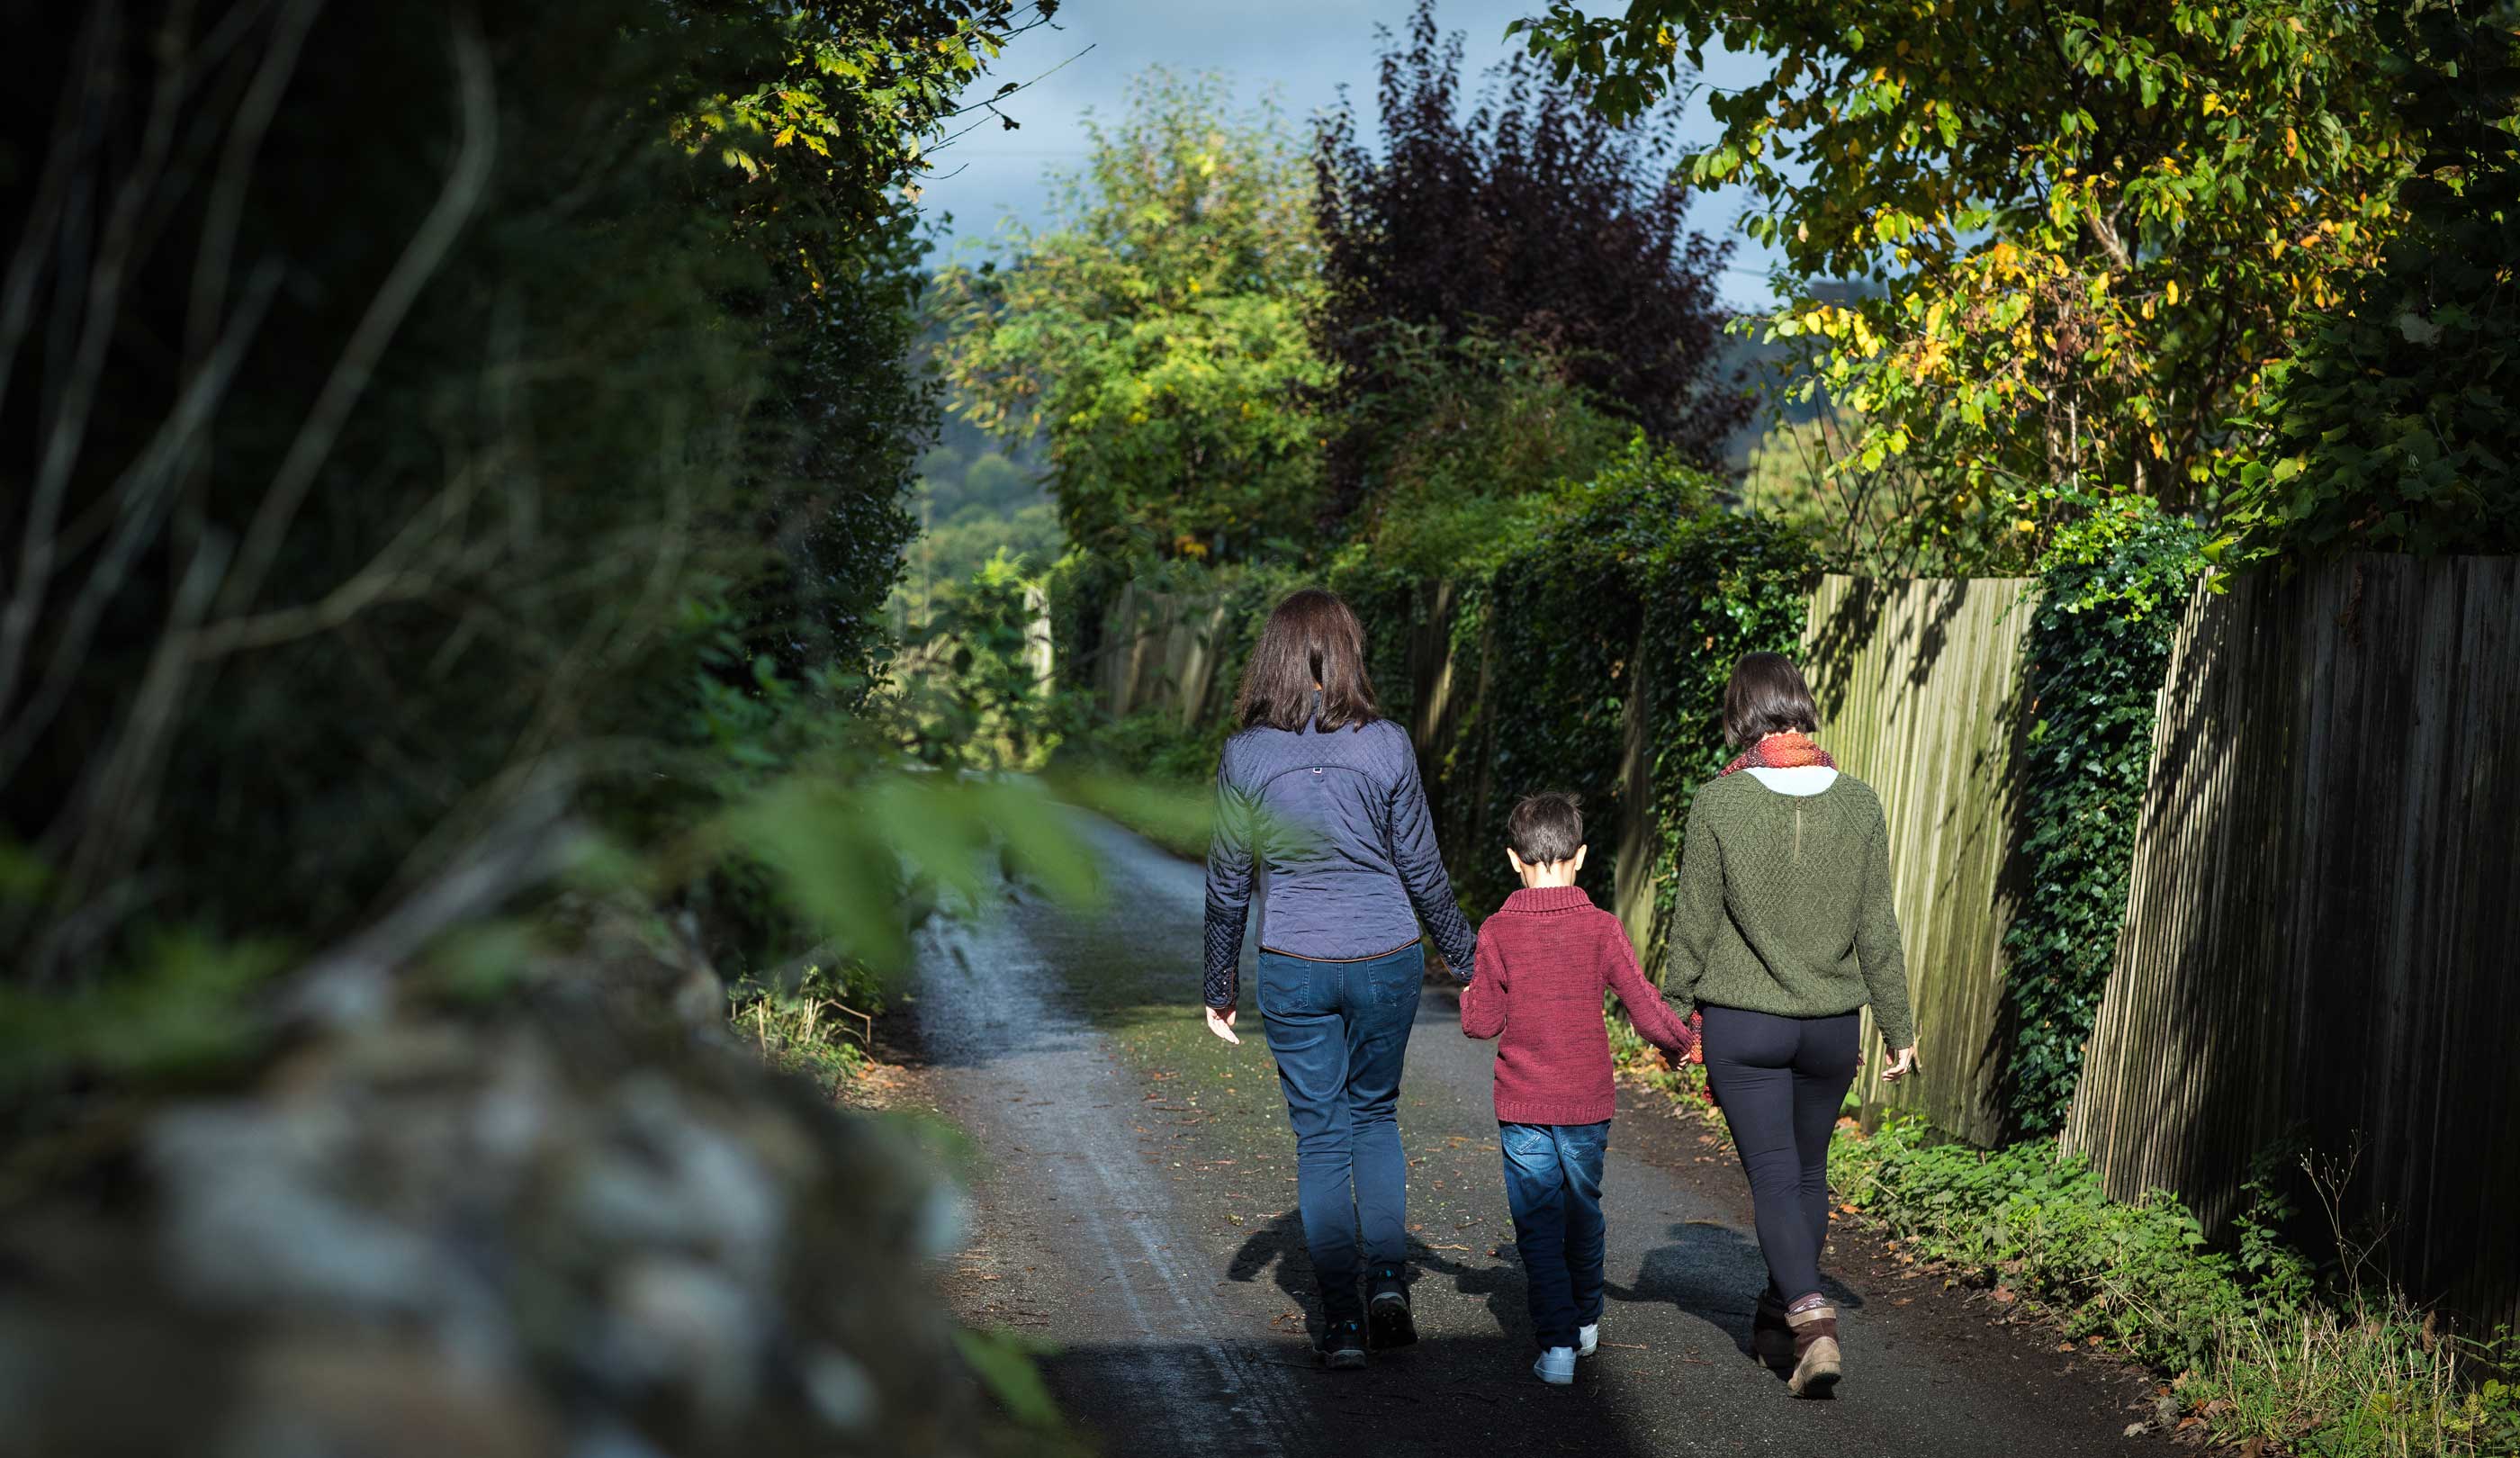 A family with two mothers and a small boy walk on a country lane